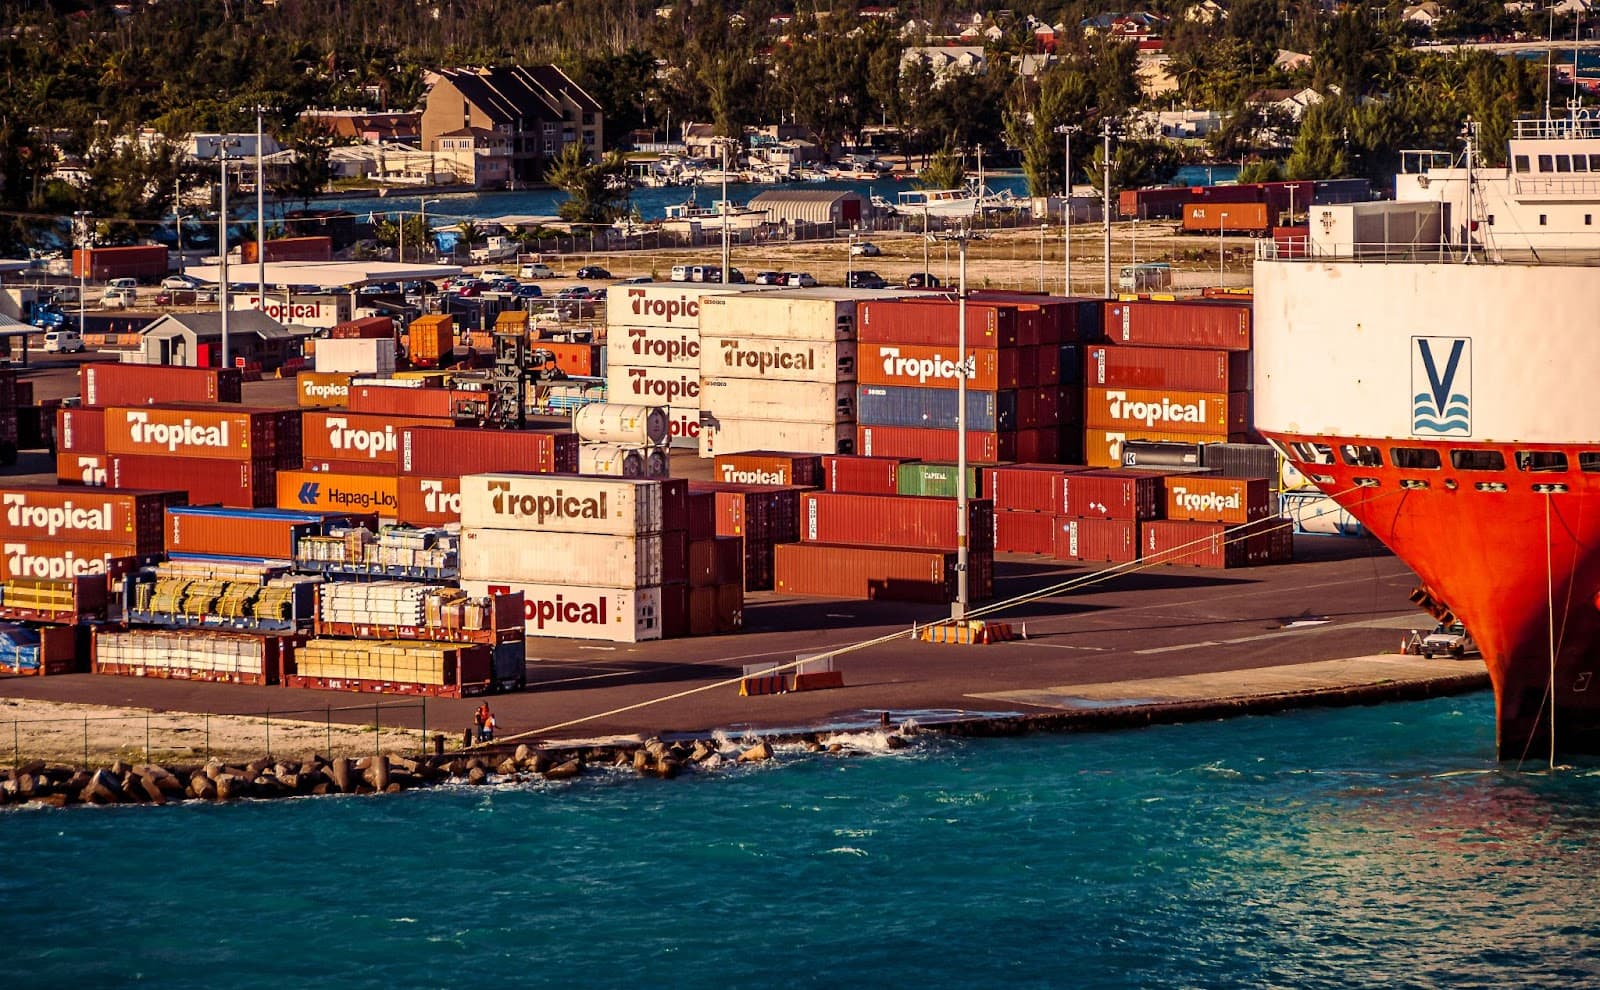 What is a Bulk Cargo? Logistics Terms and Definitions